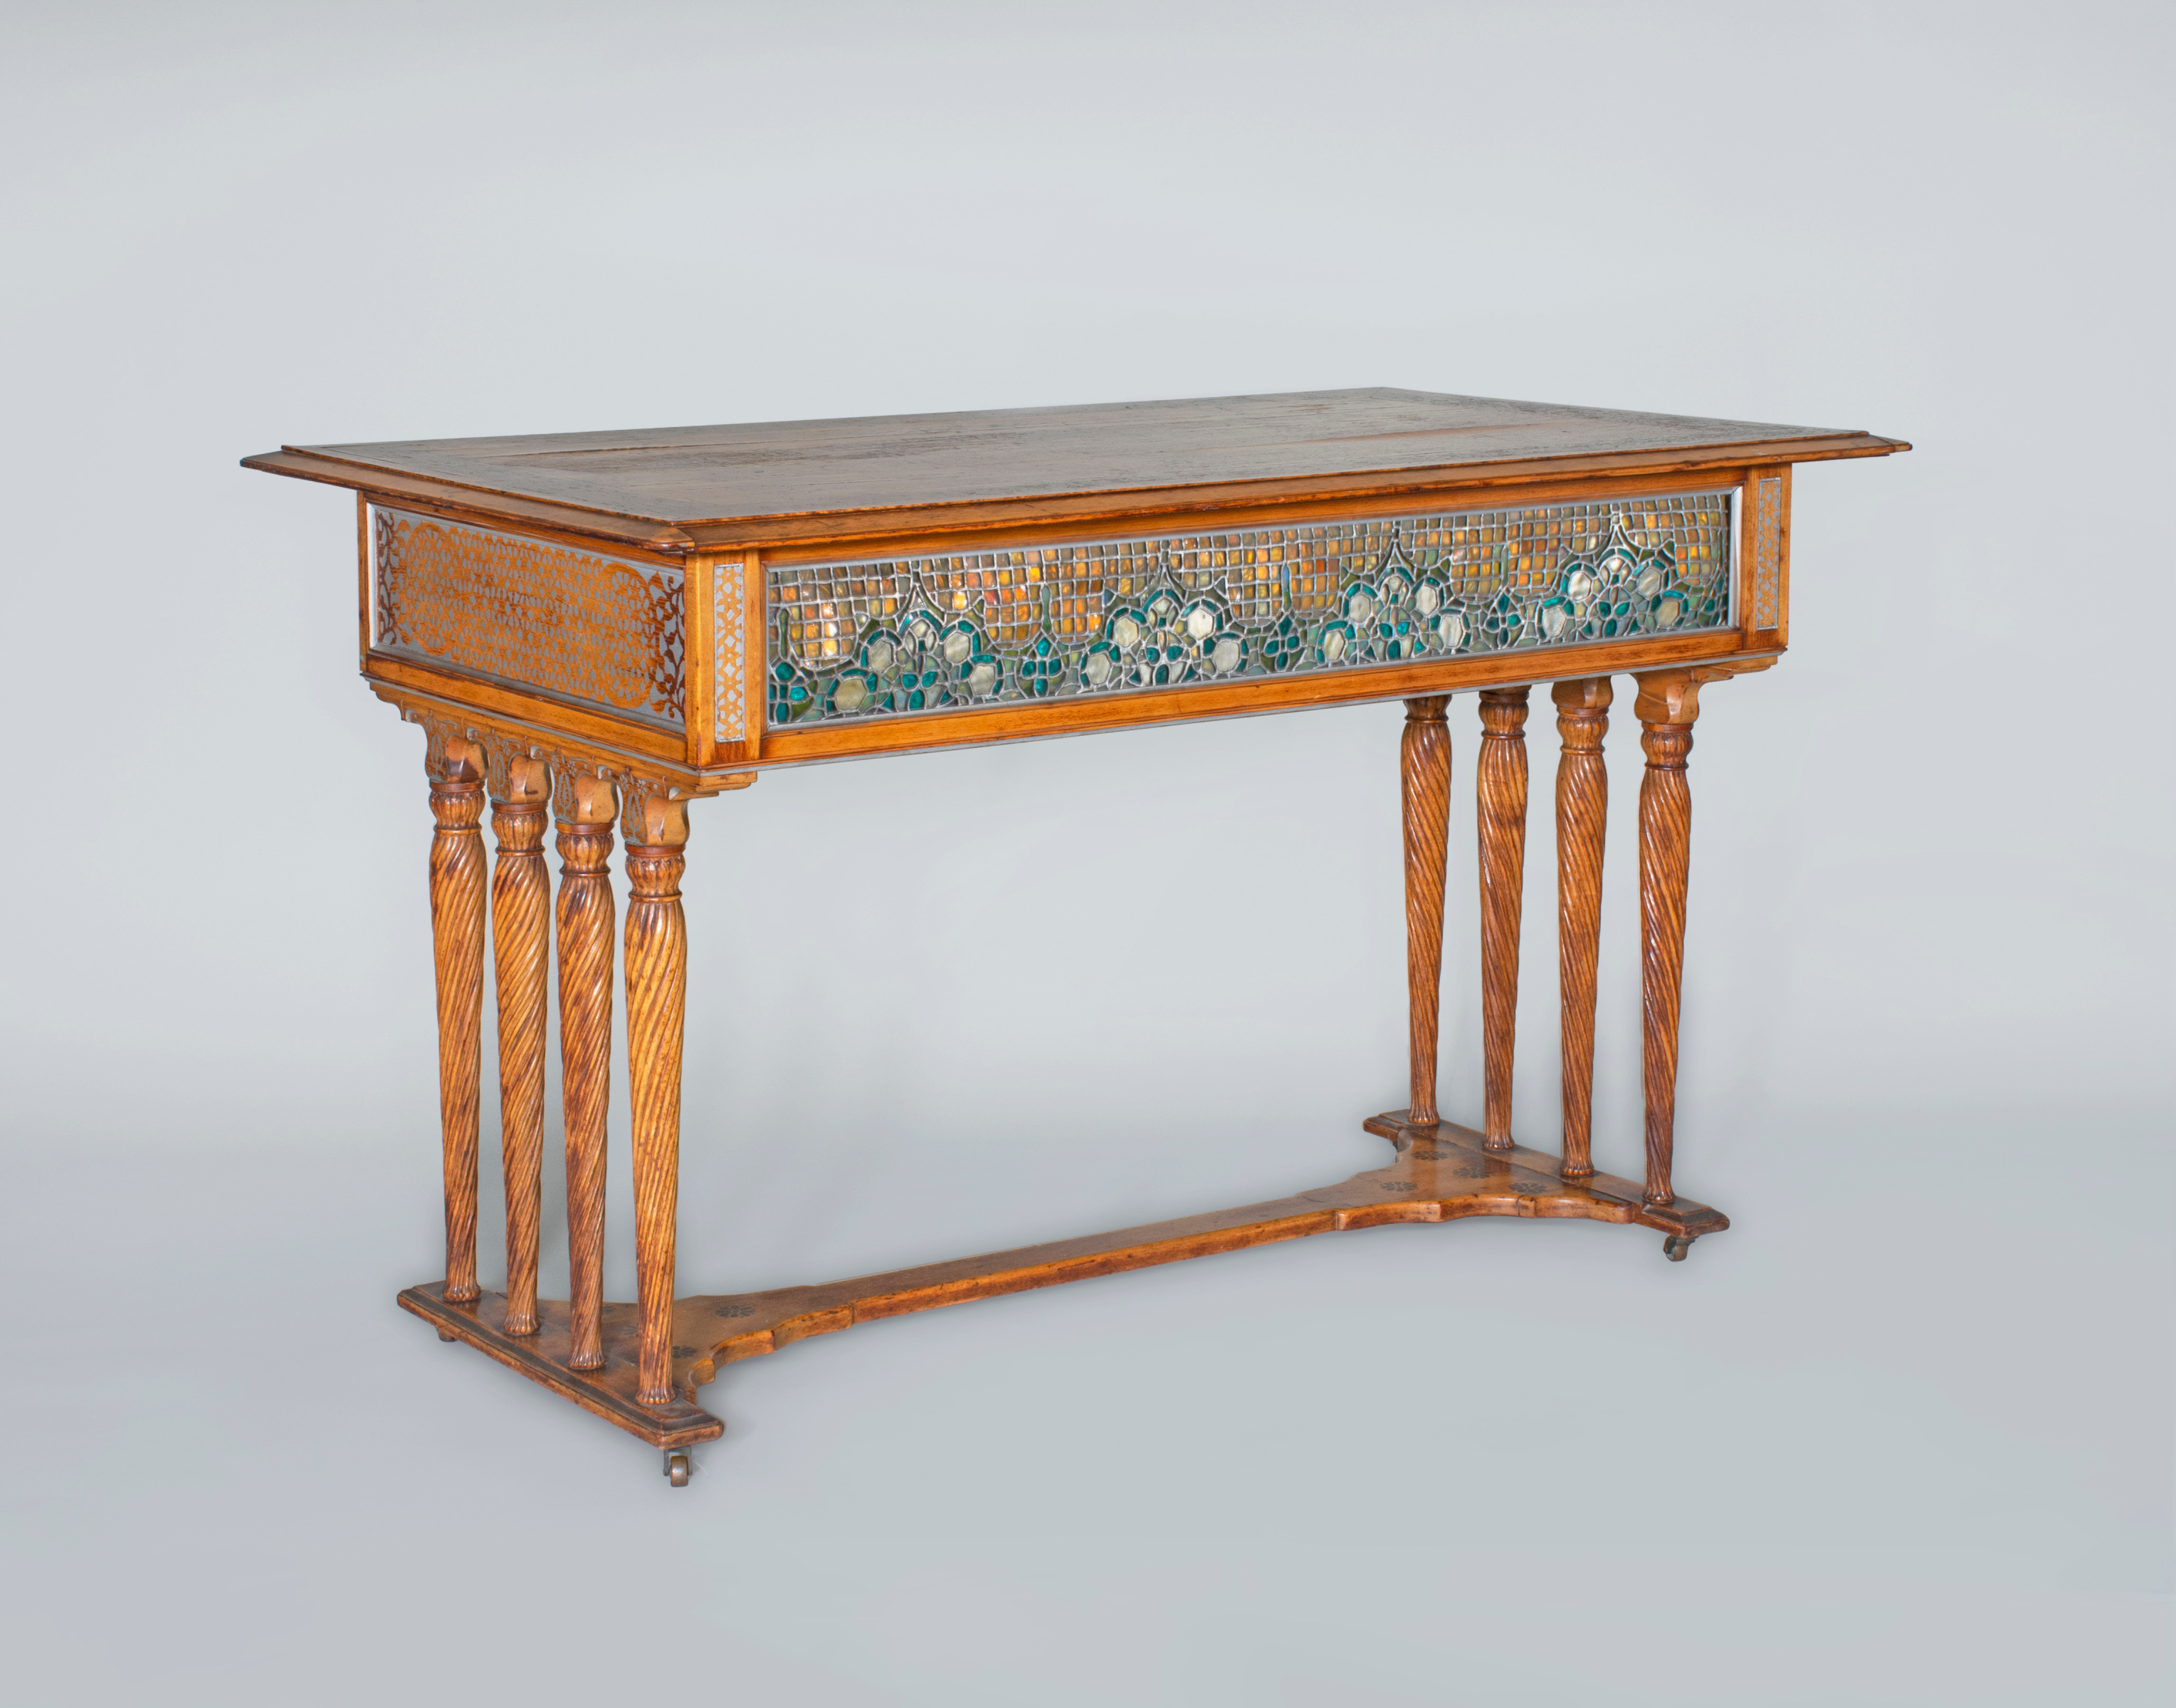 an early piece of furniture by louis comfort tiffany, very rare, aesthetic movement style incorporating stylistic influence and techniques. turned wooden legs, with extremely rare horizontal inset leaded glass panels in blue and silver